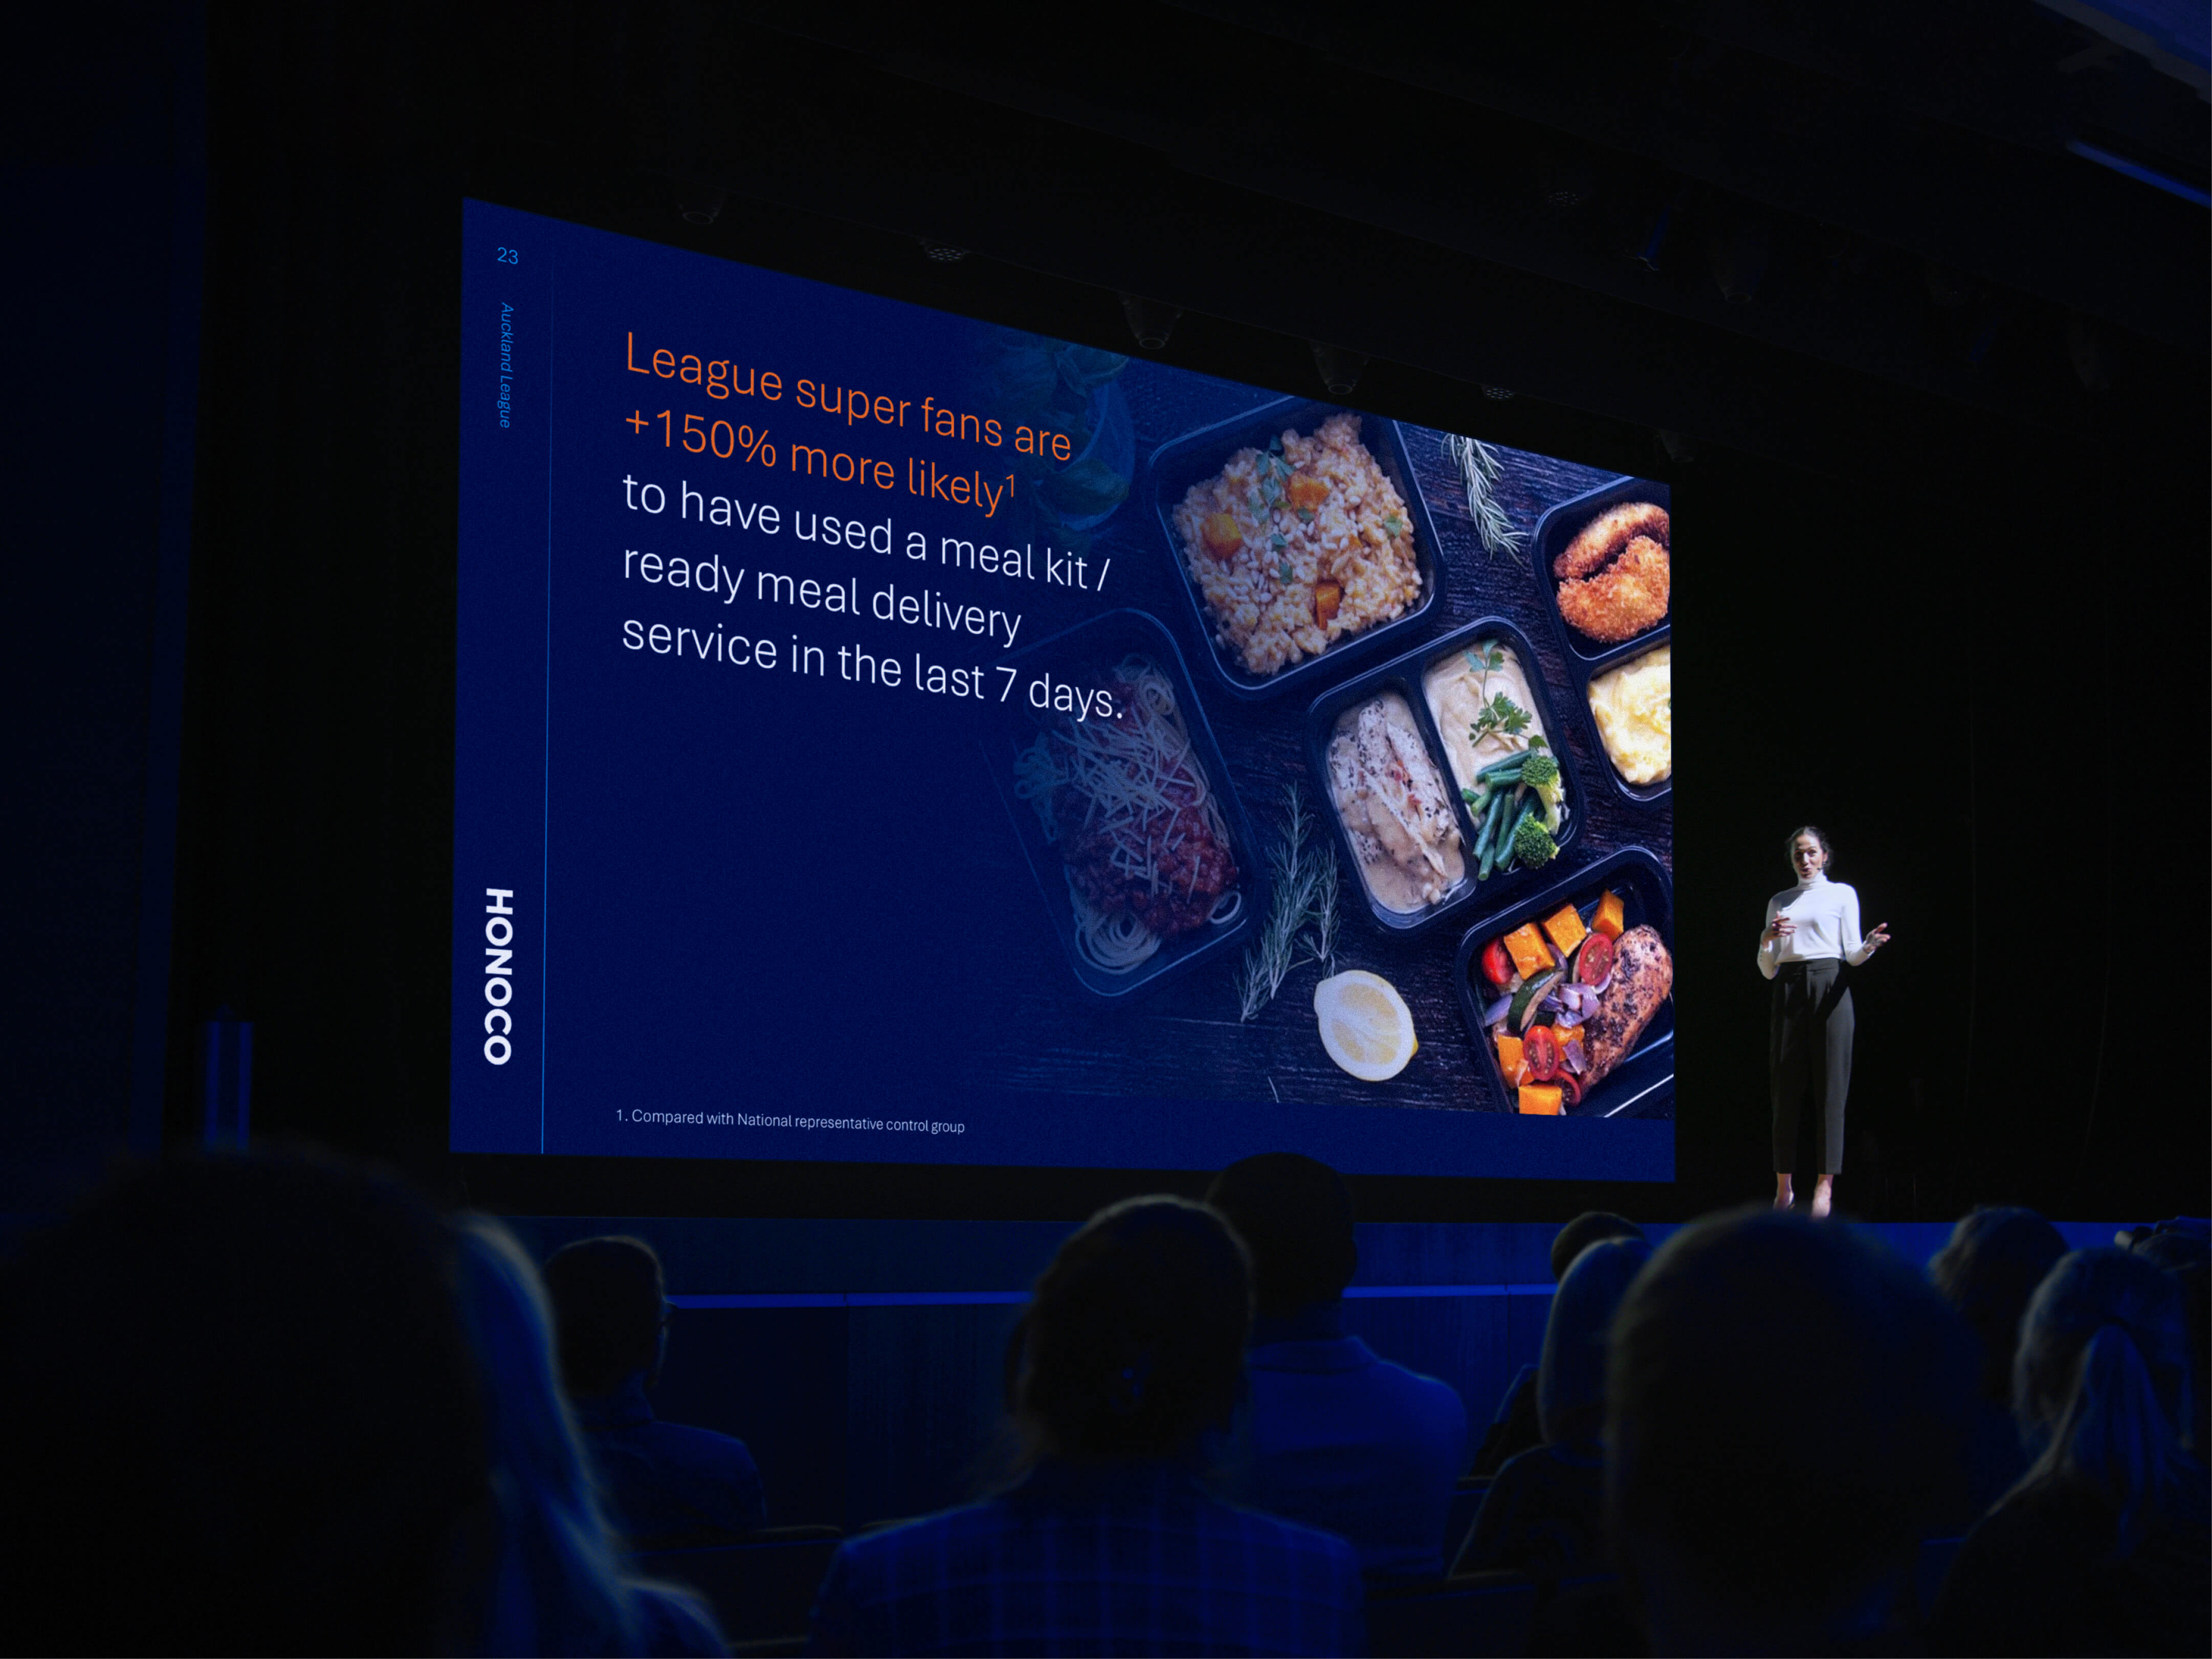 Sample PPT presentation on screen as part of the 2023 brand refresh